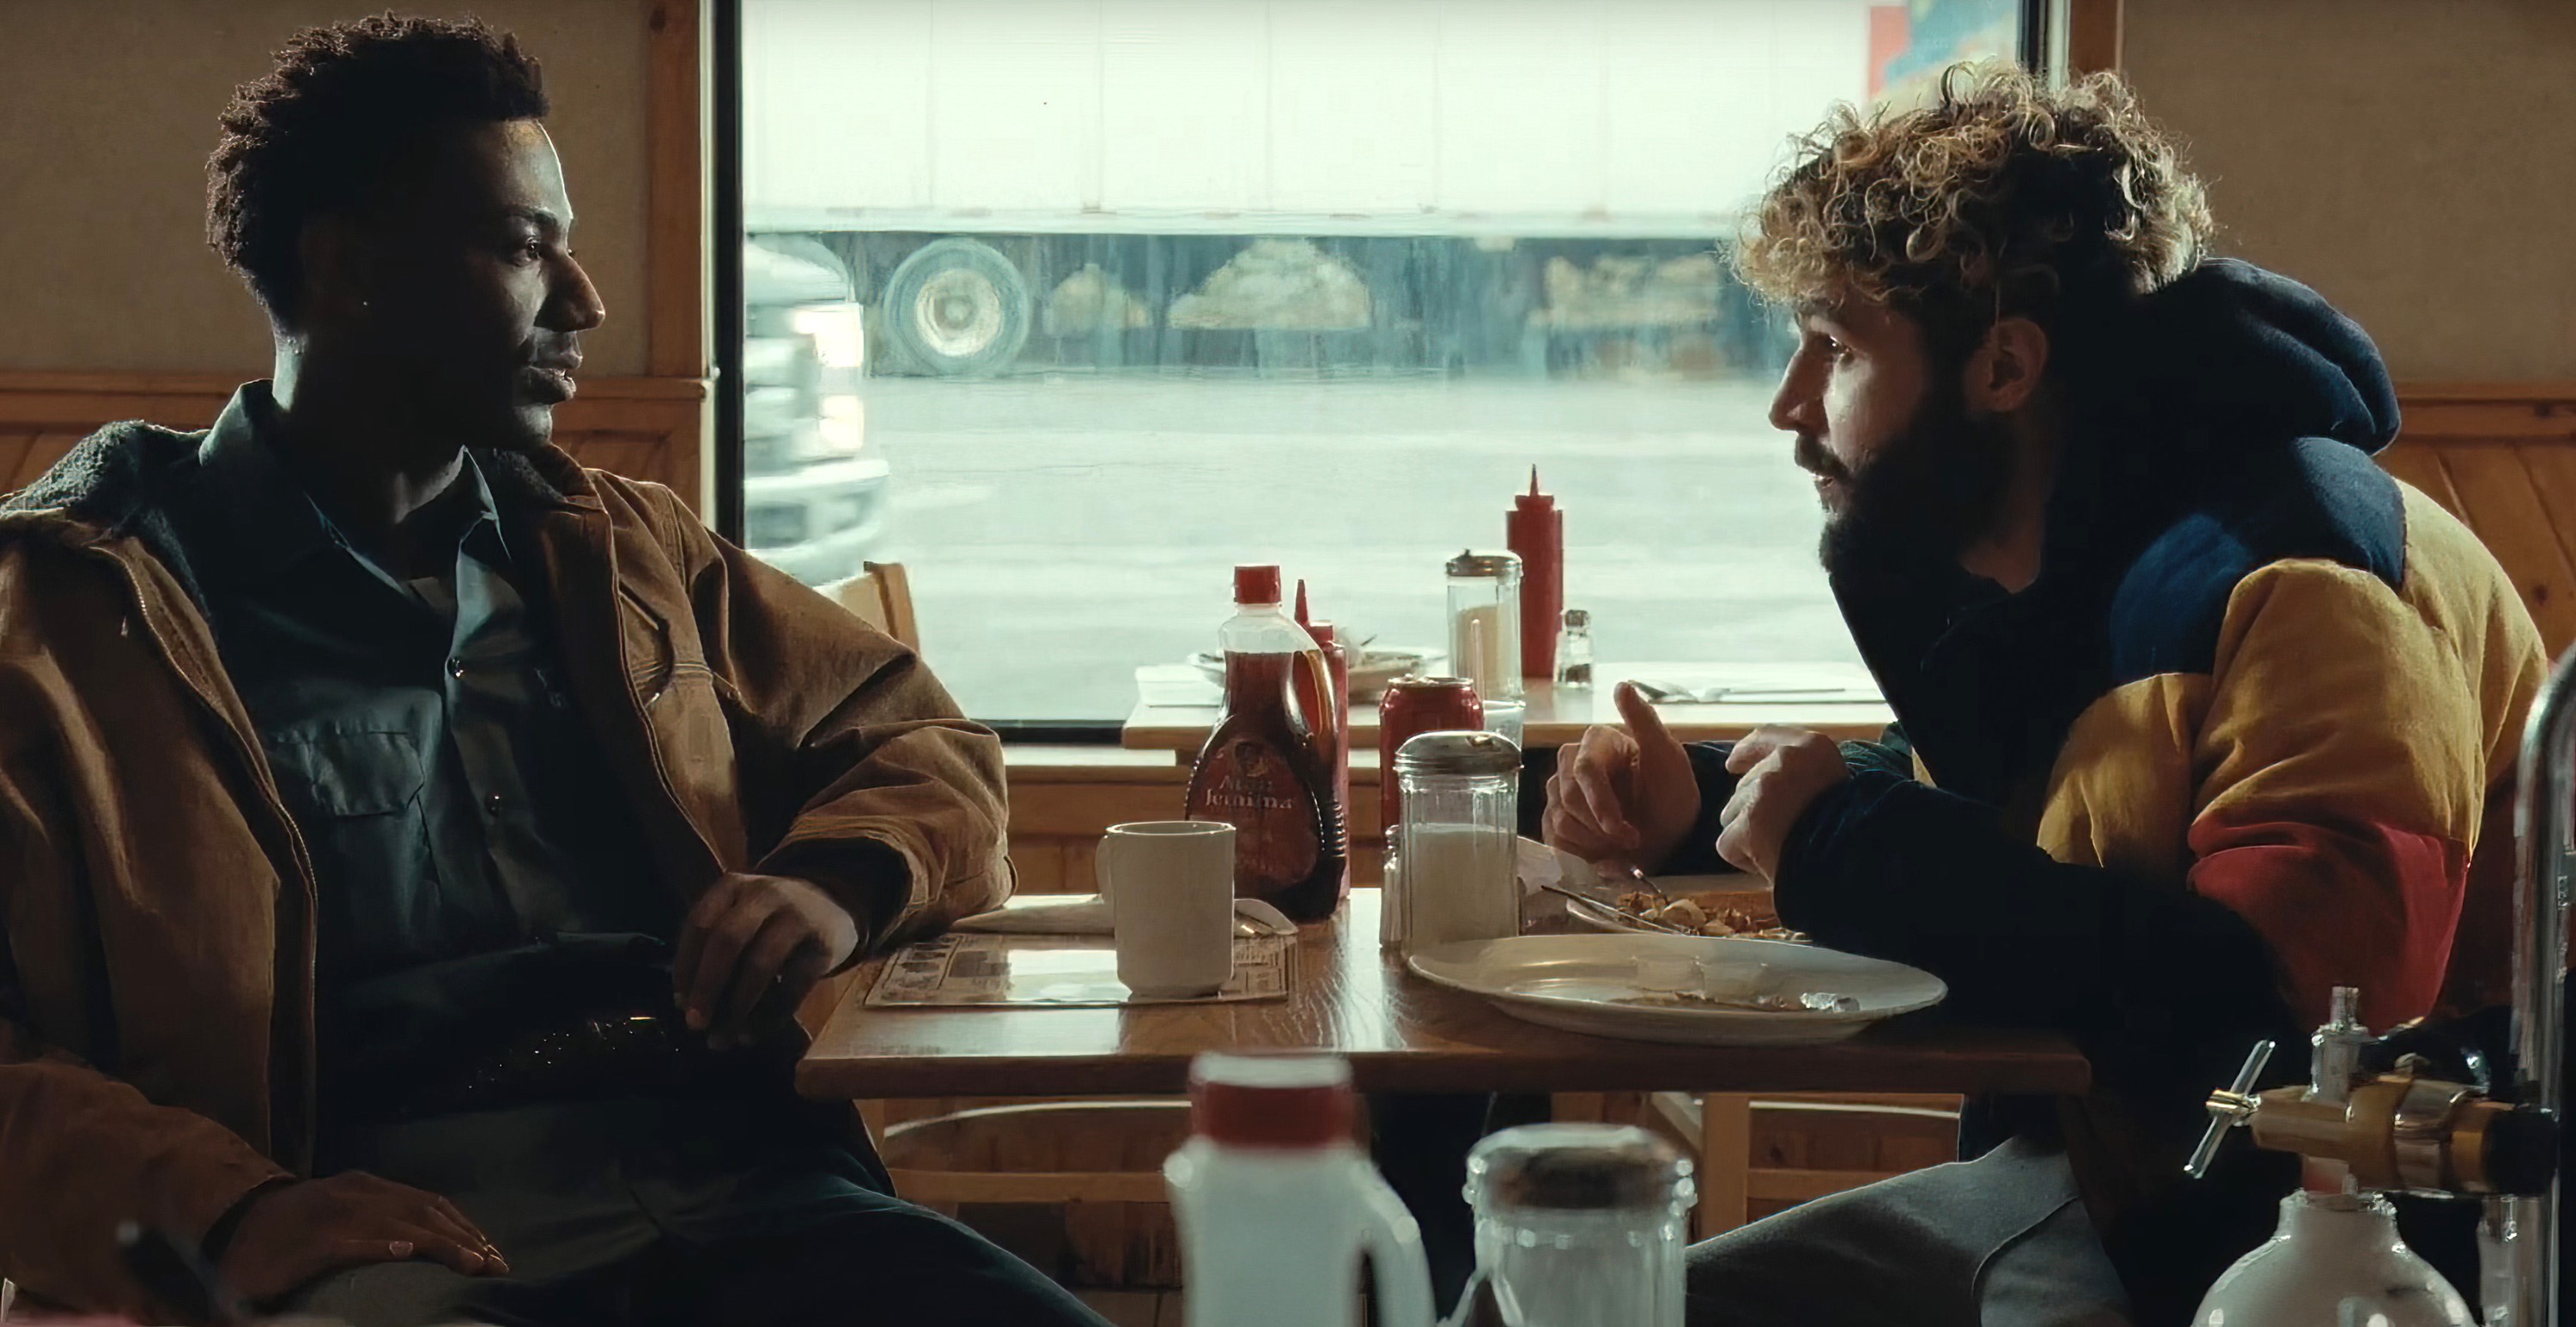 Two friends sit and eat at a diner.